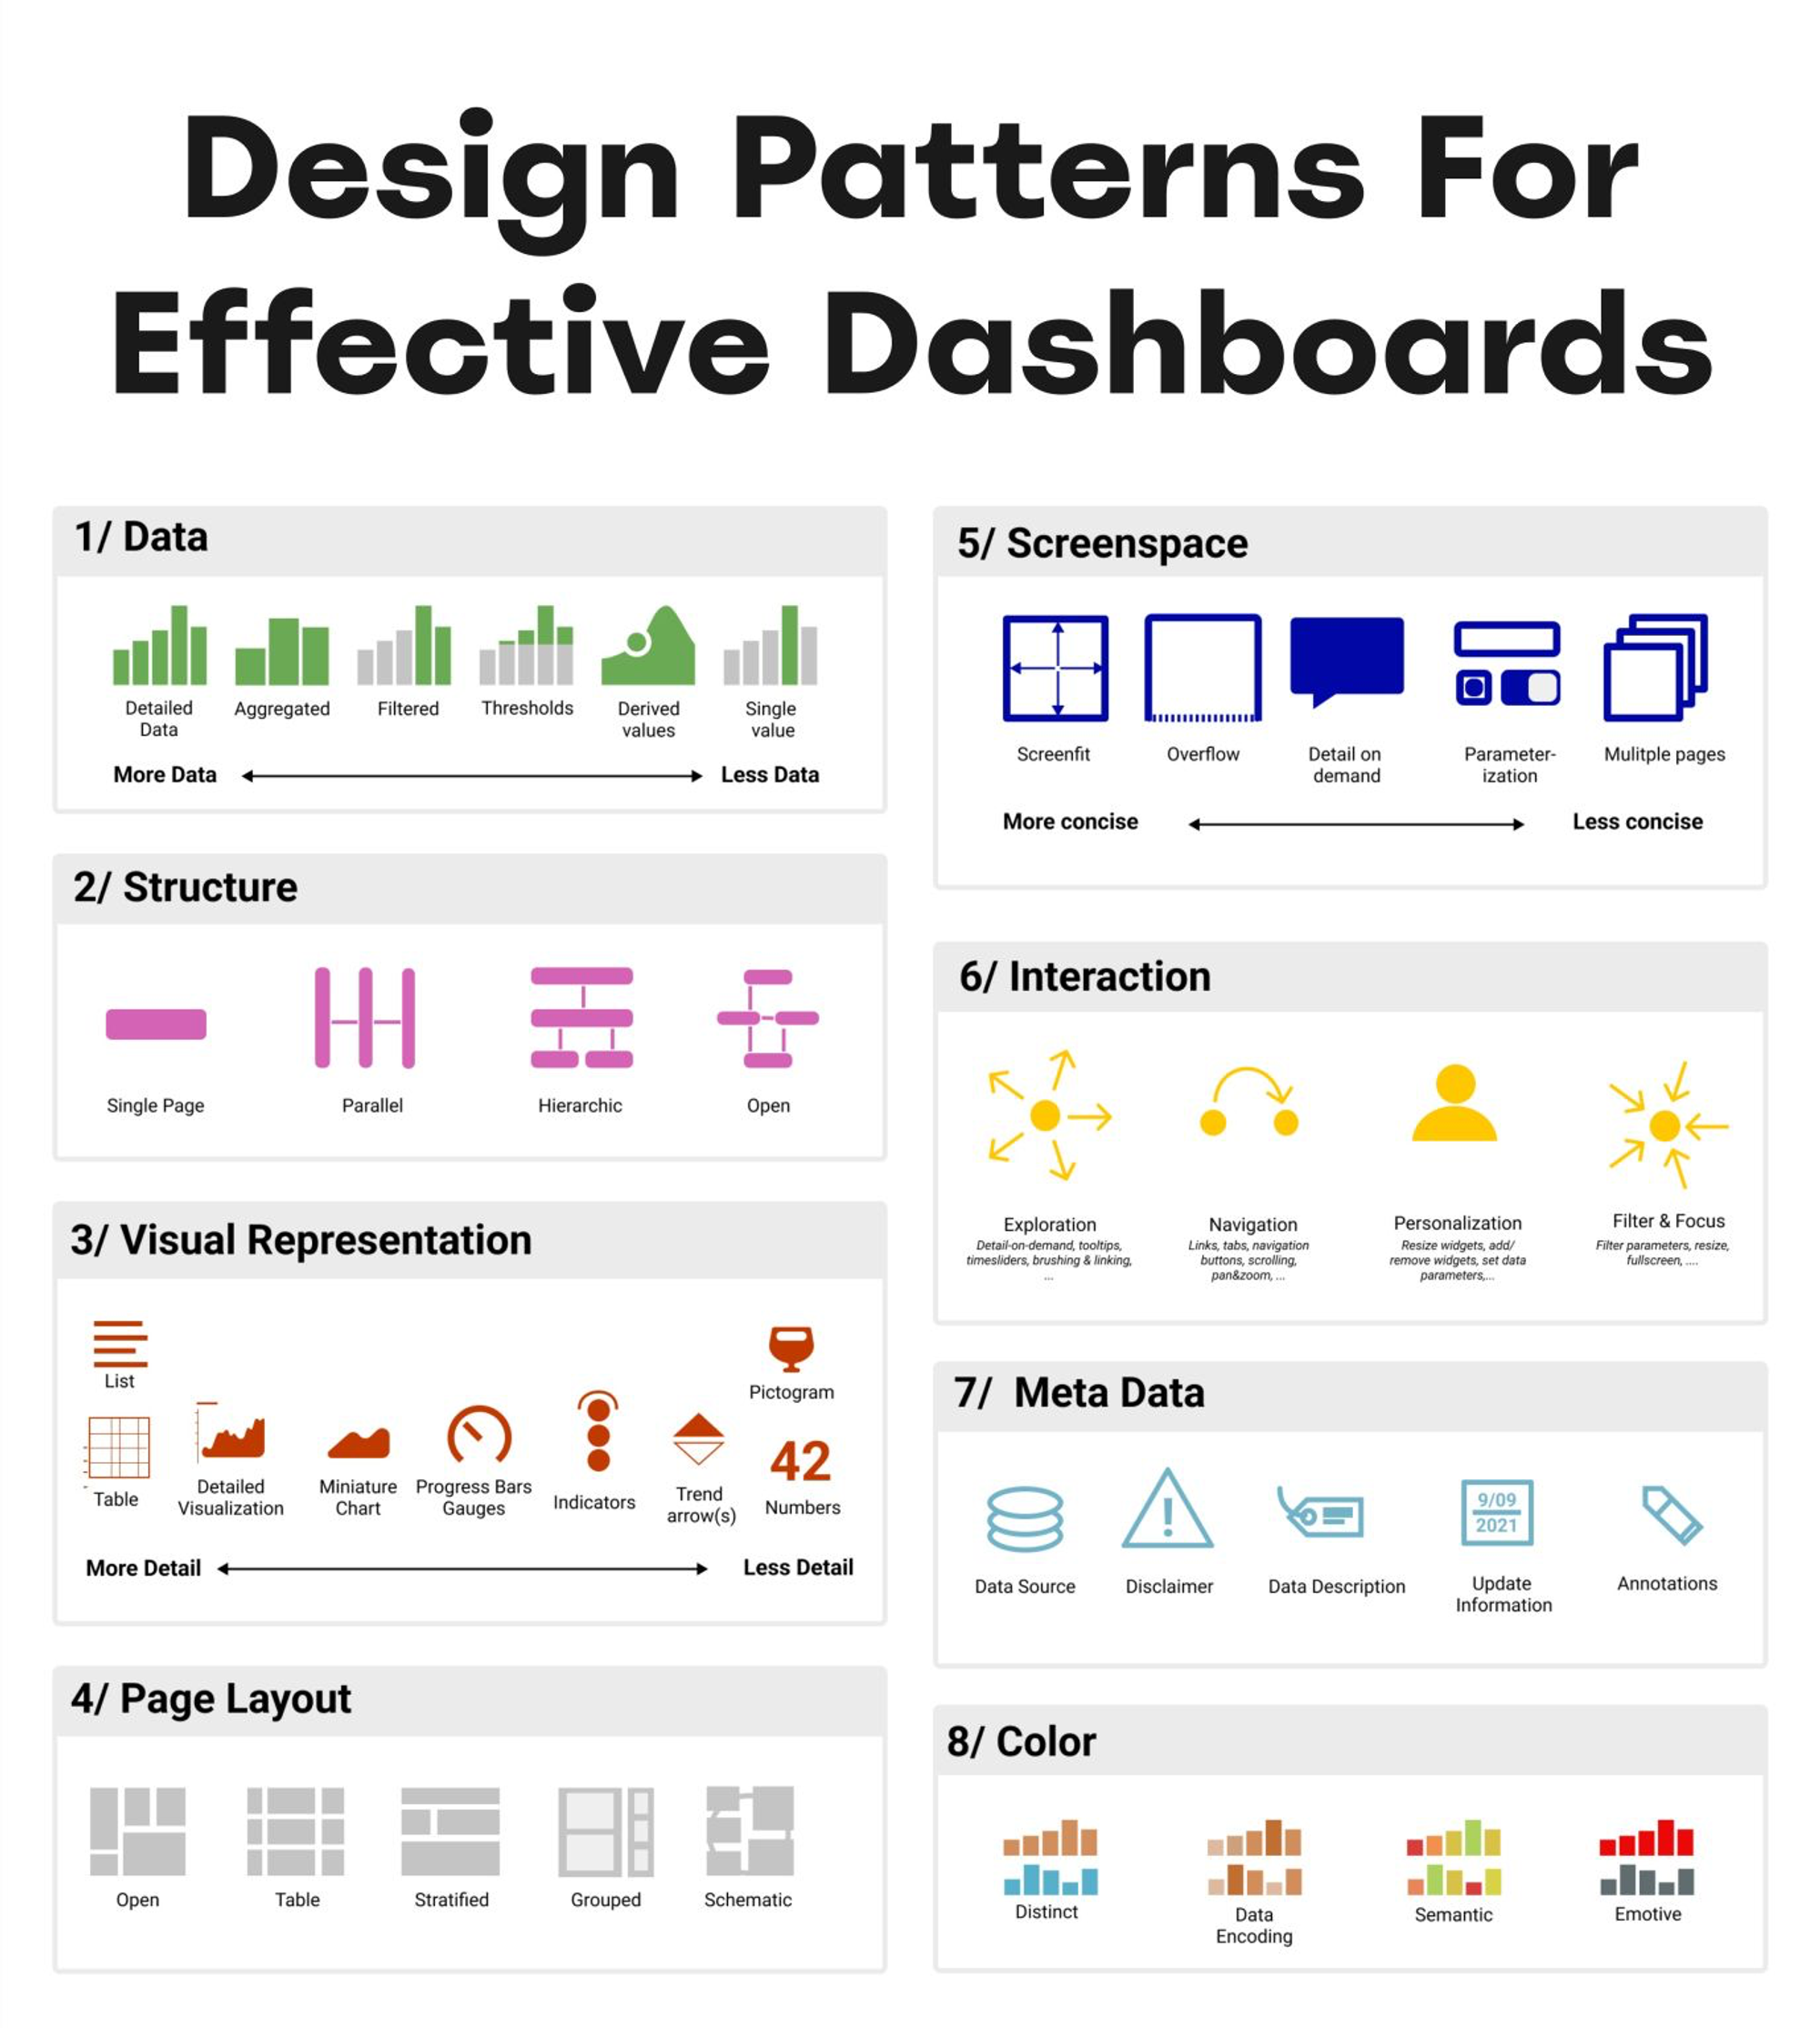 Design Patterns For Effective Dashboards by Vitaly Friedman